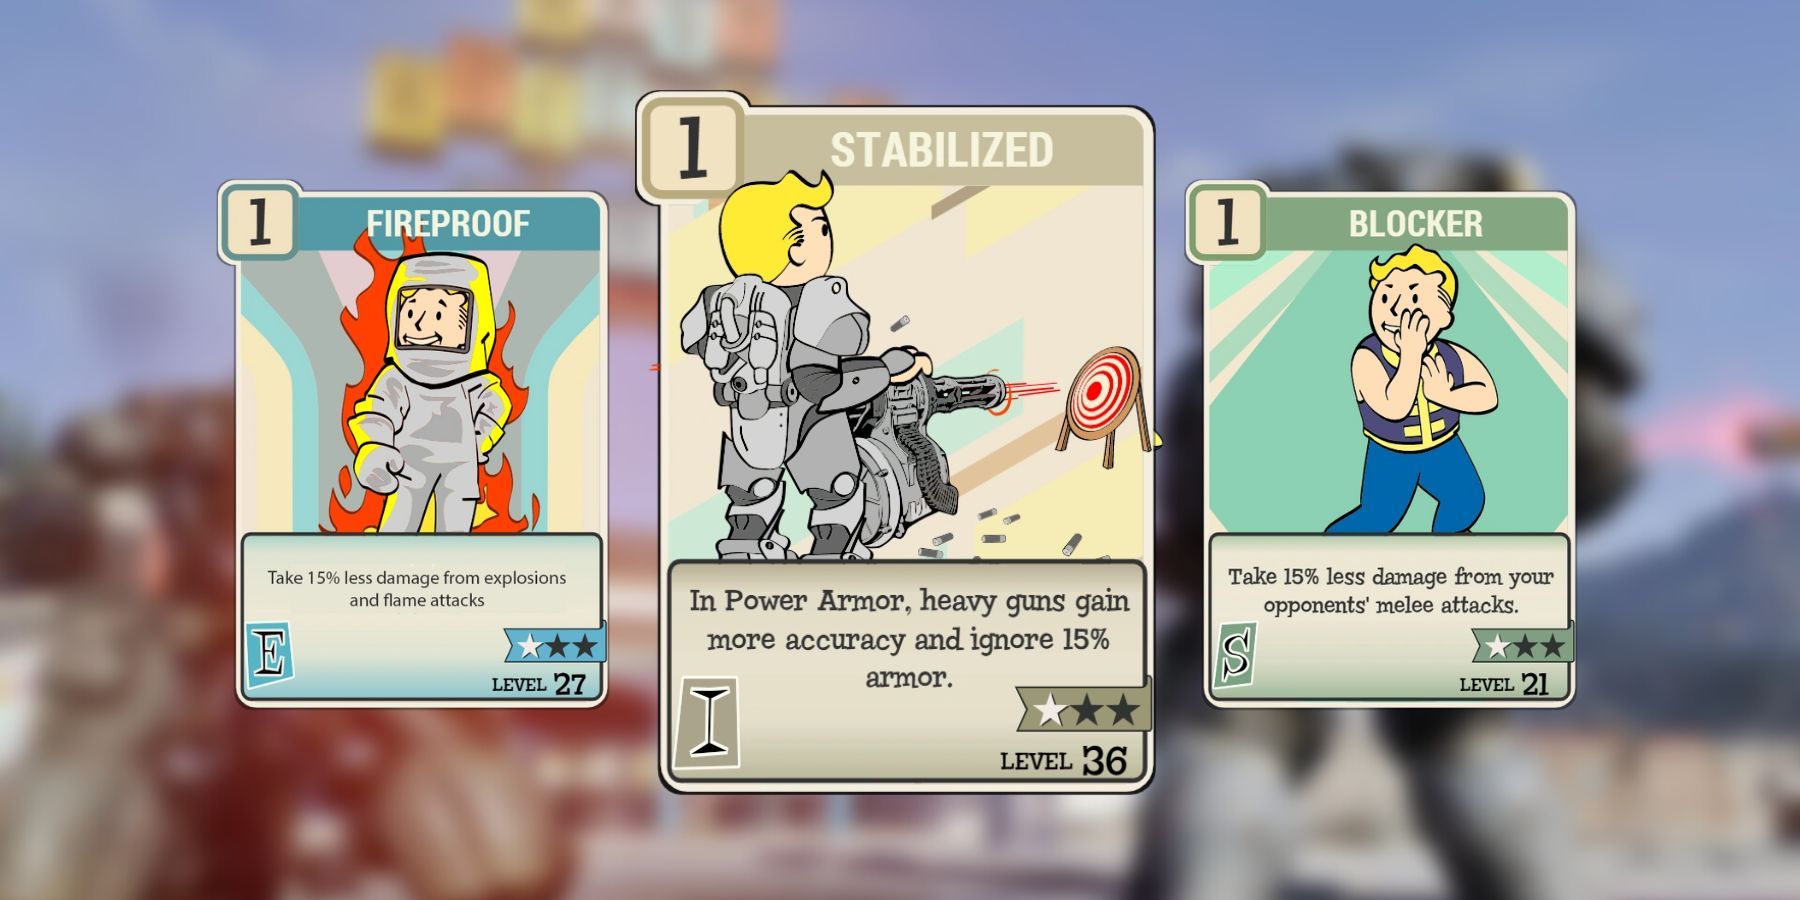 image showing the best perk cards for power armor in fallout 76.